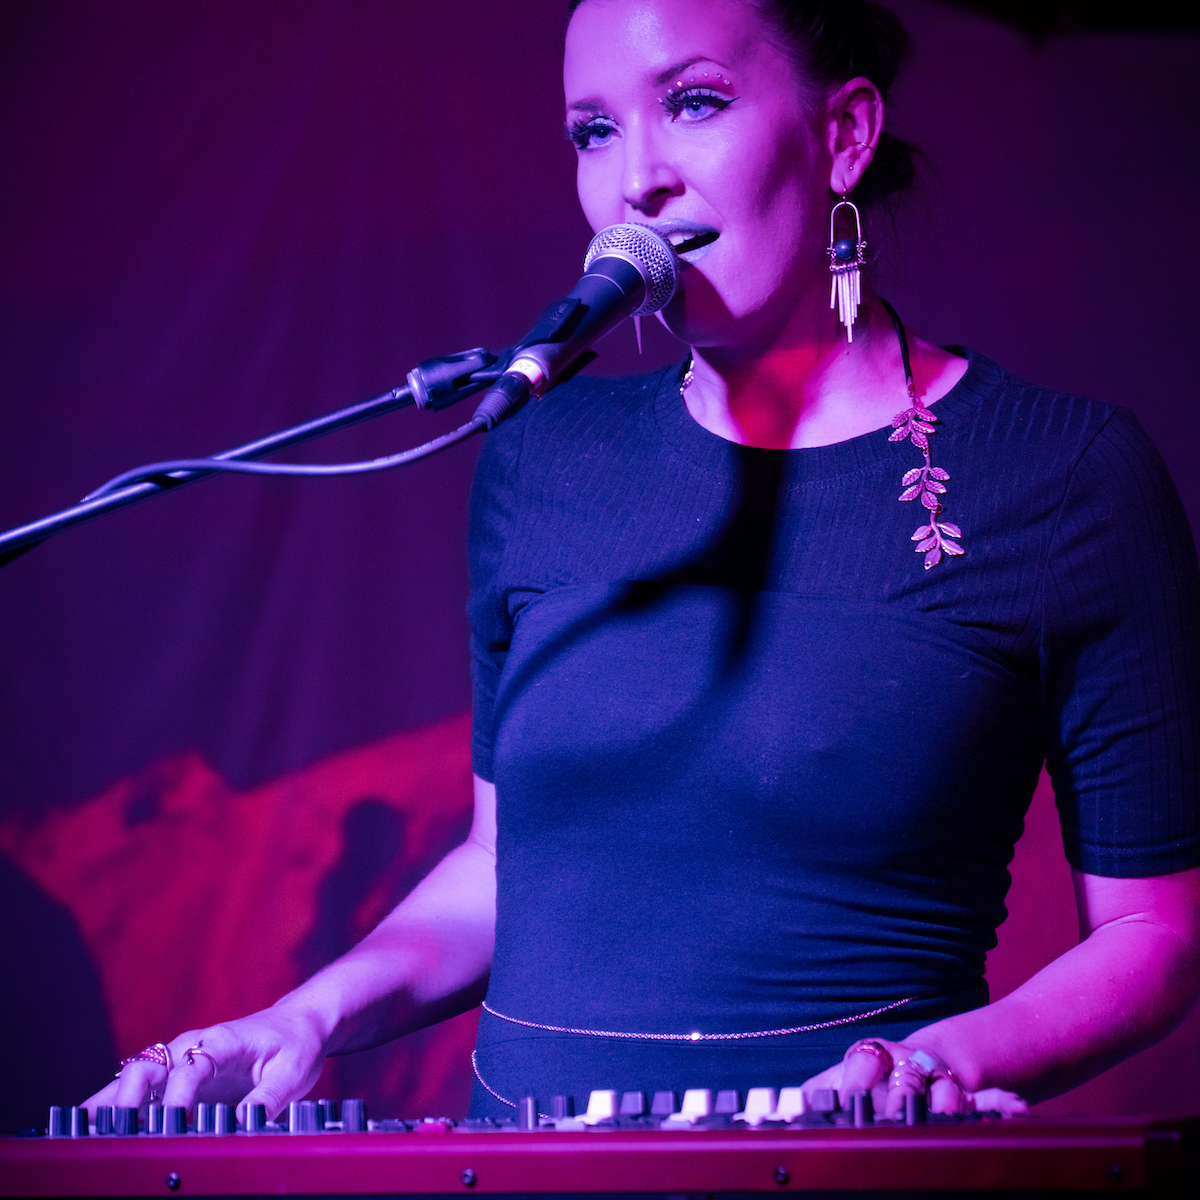 A performer on keyboards and singing.